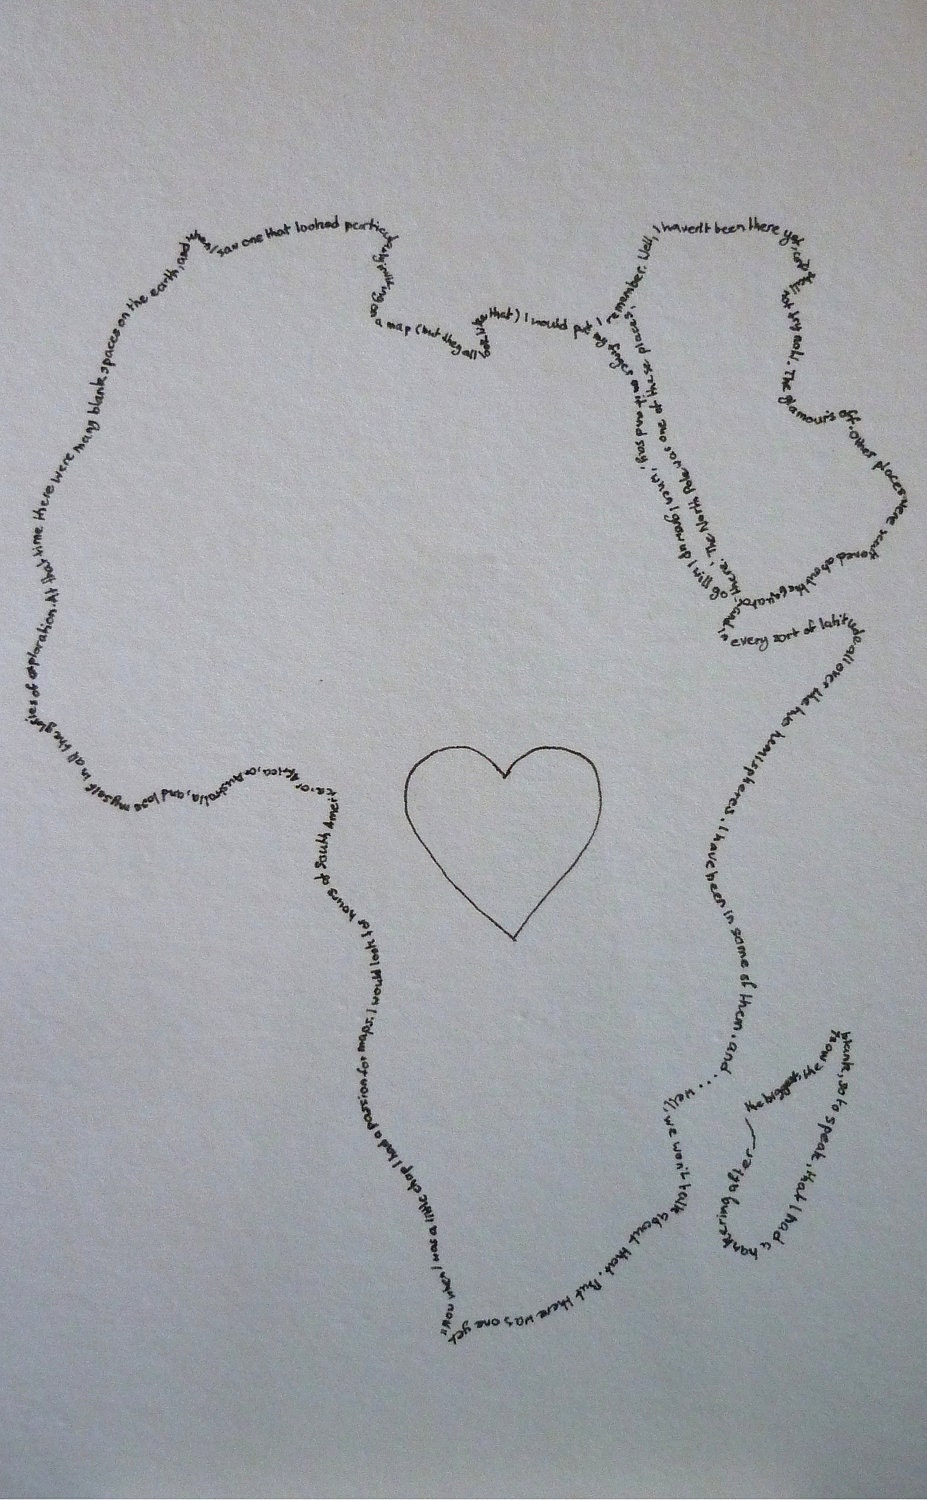 Africa Line Map